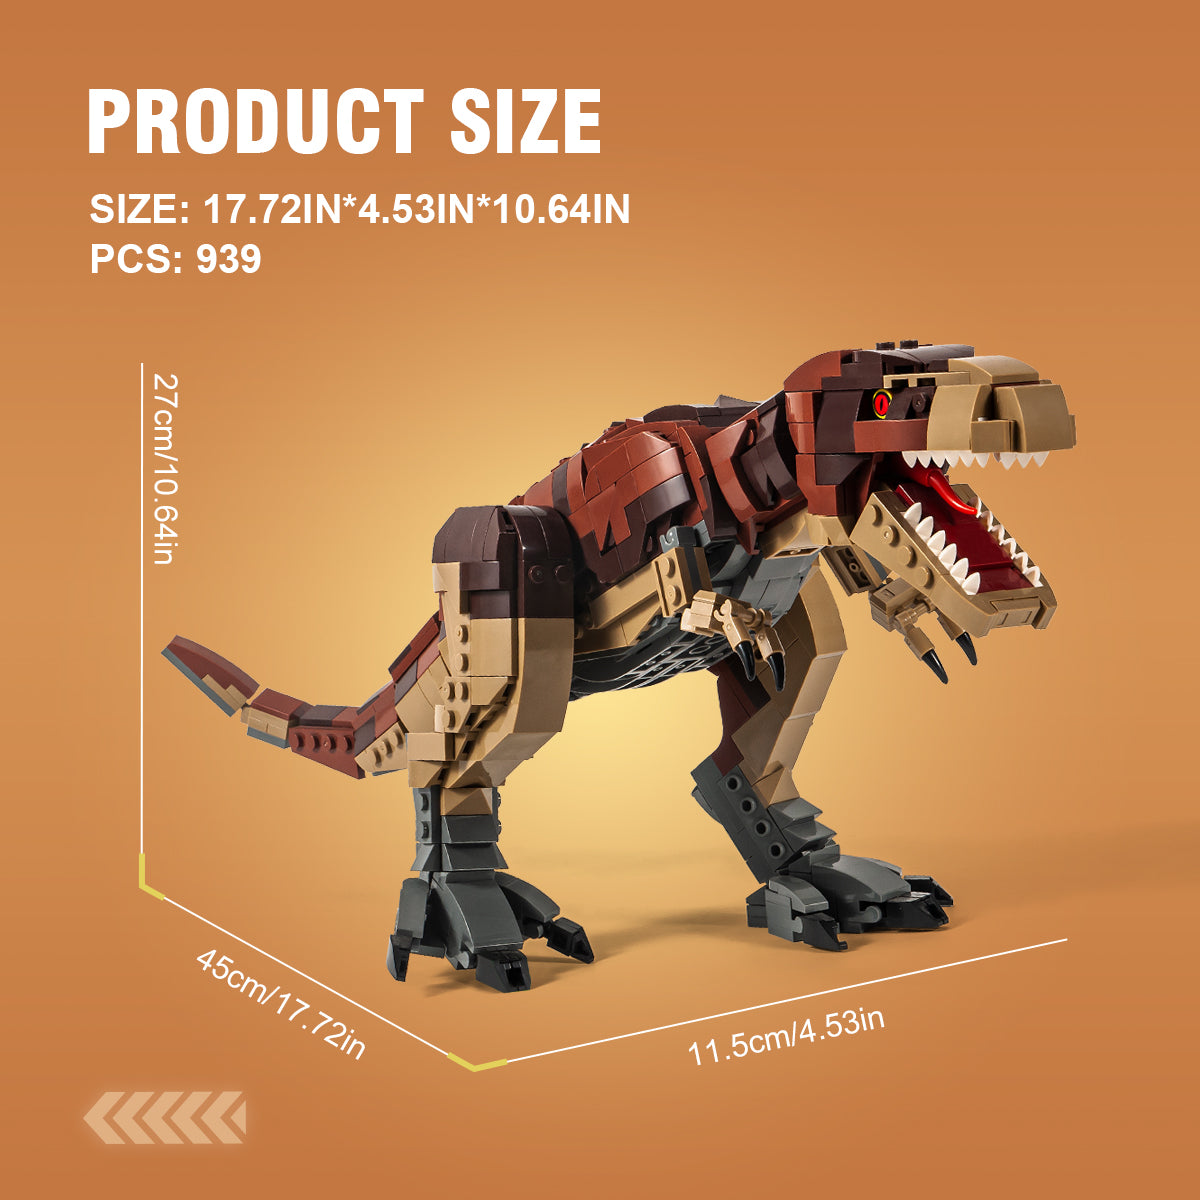 DAHONPA Dinosaur Series Tyrannosaurus Model Building Block Set, with 939 Pieces, Building Blocks Toys Gifts for Kids and Adults